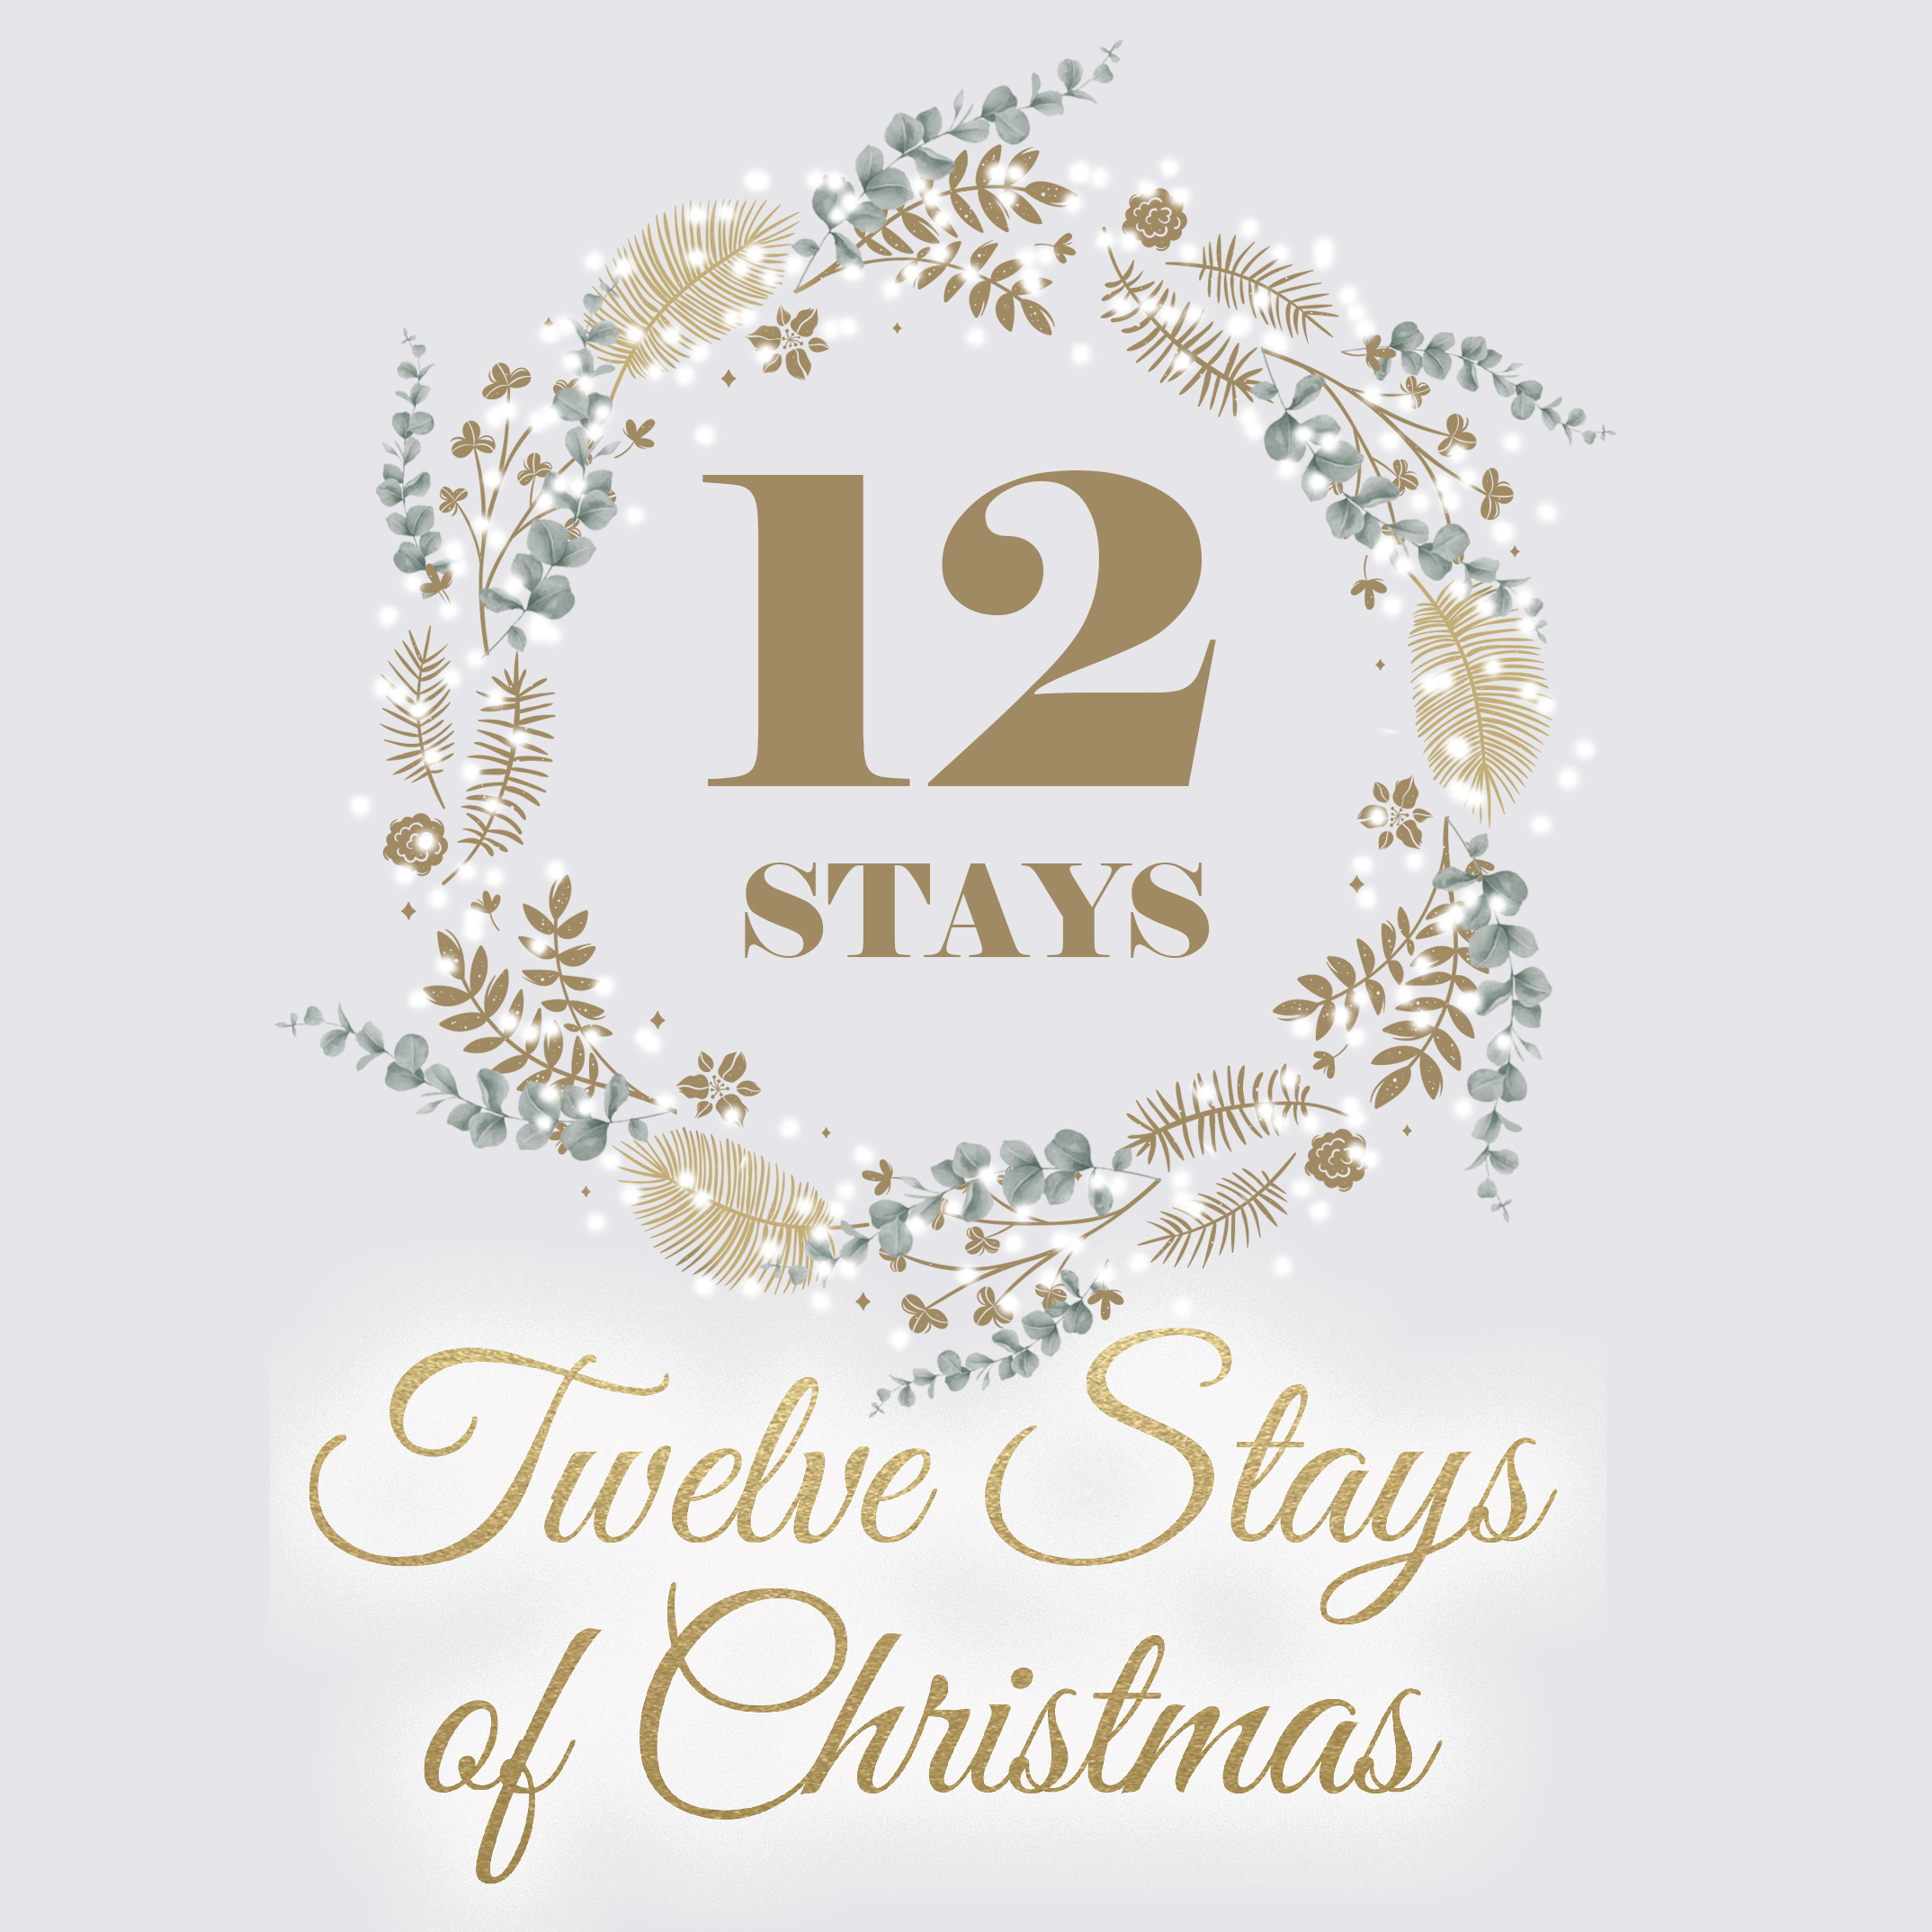 12 Stays of Christmas | Terms & Conditions 